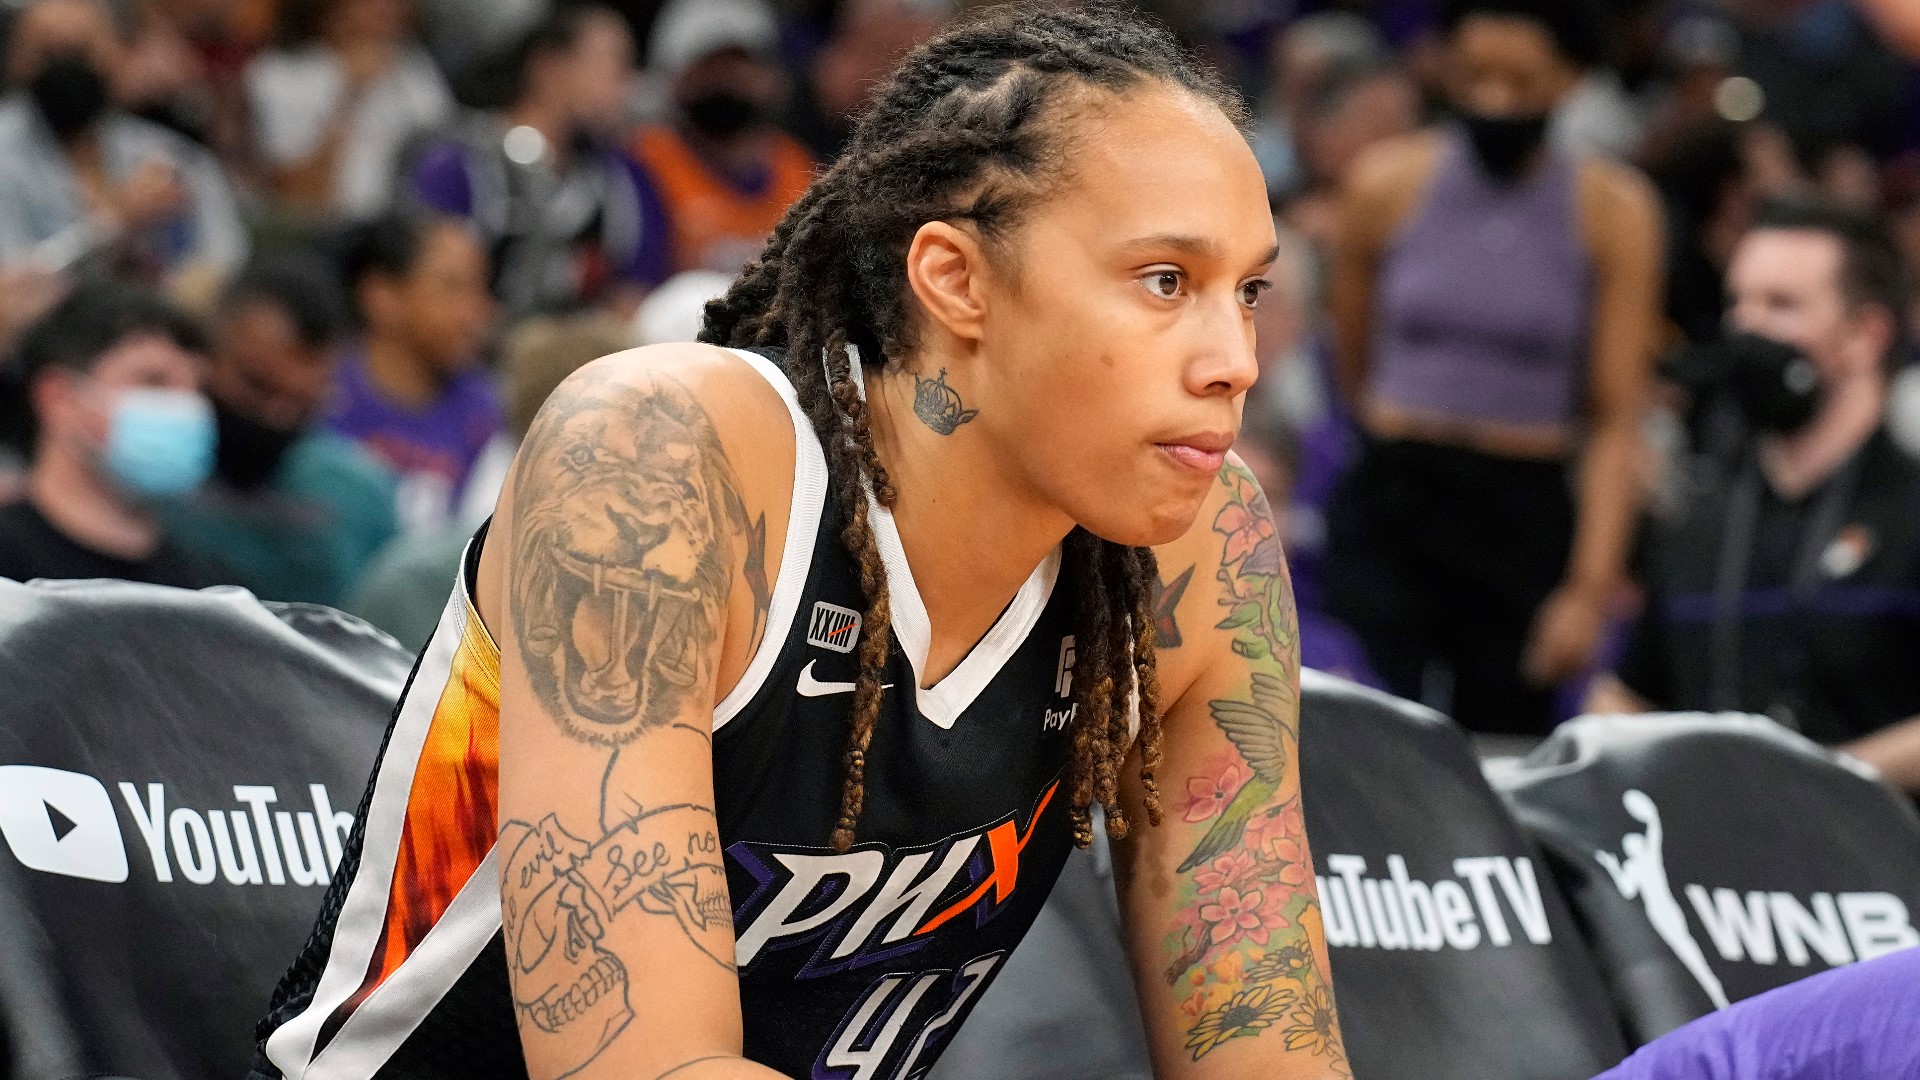 WNBA player Brittney Griner has been detained in Russia since mid-February. It's unclear how a surprise prisoner exchange will impact Griner.